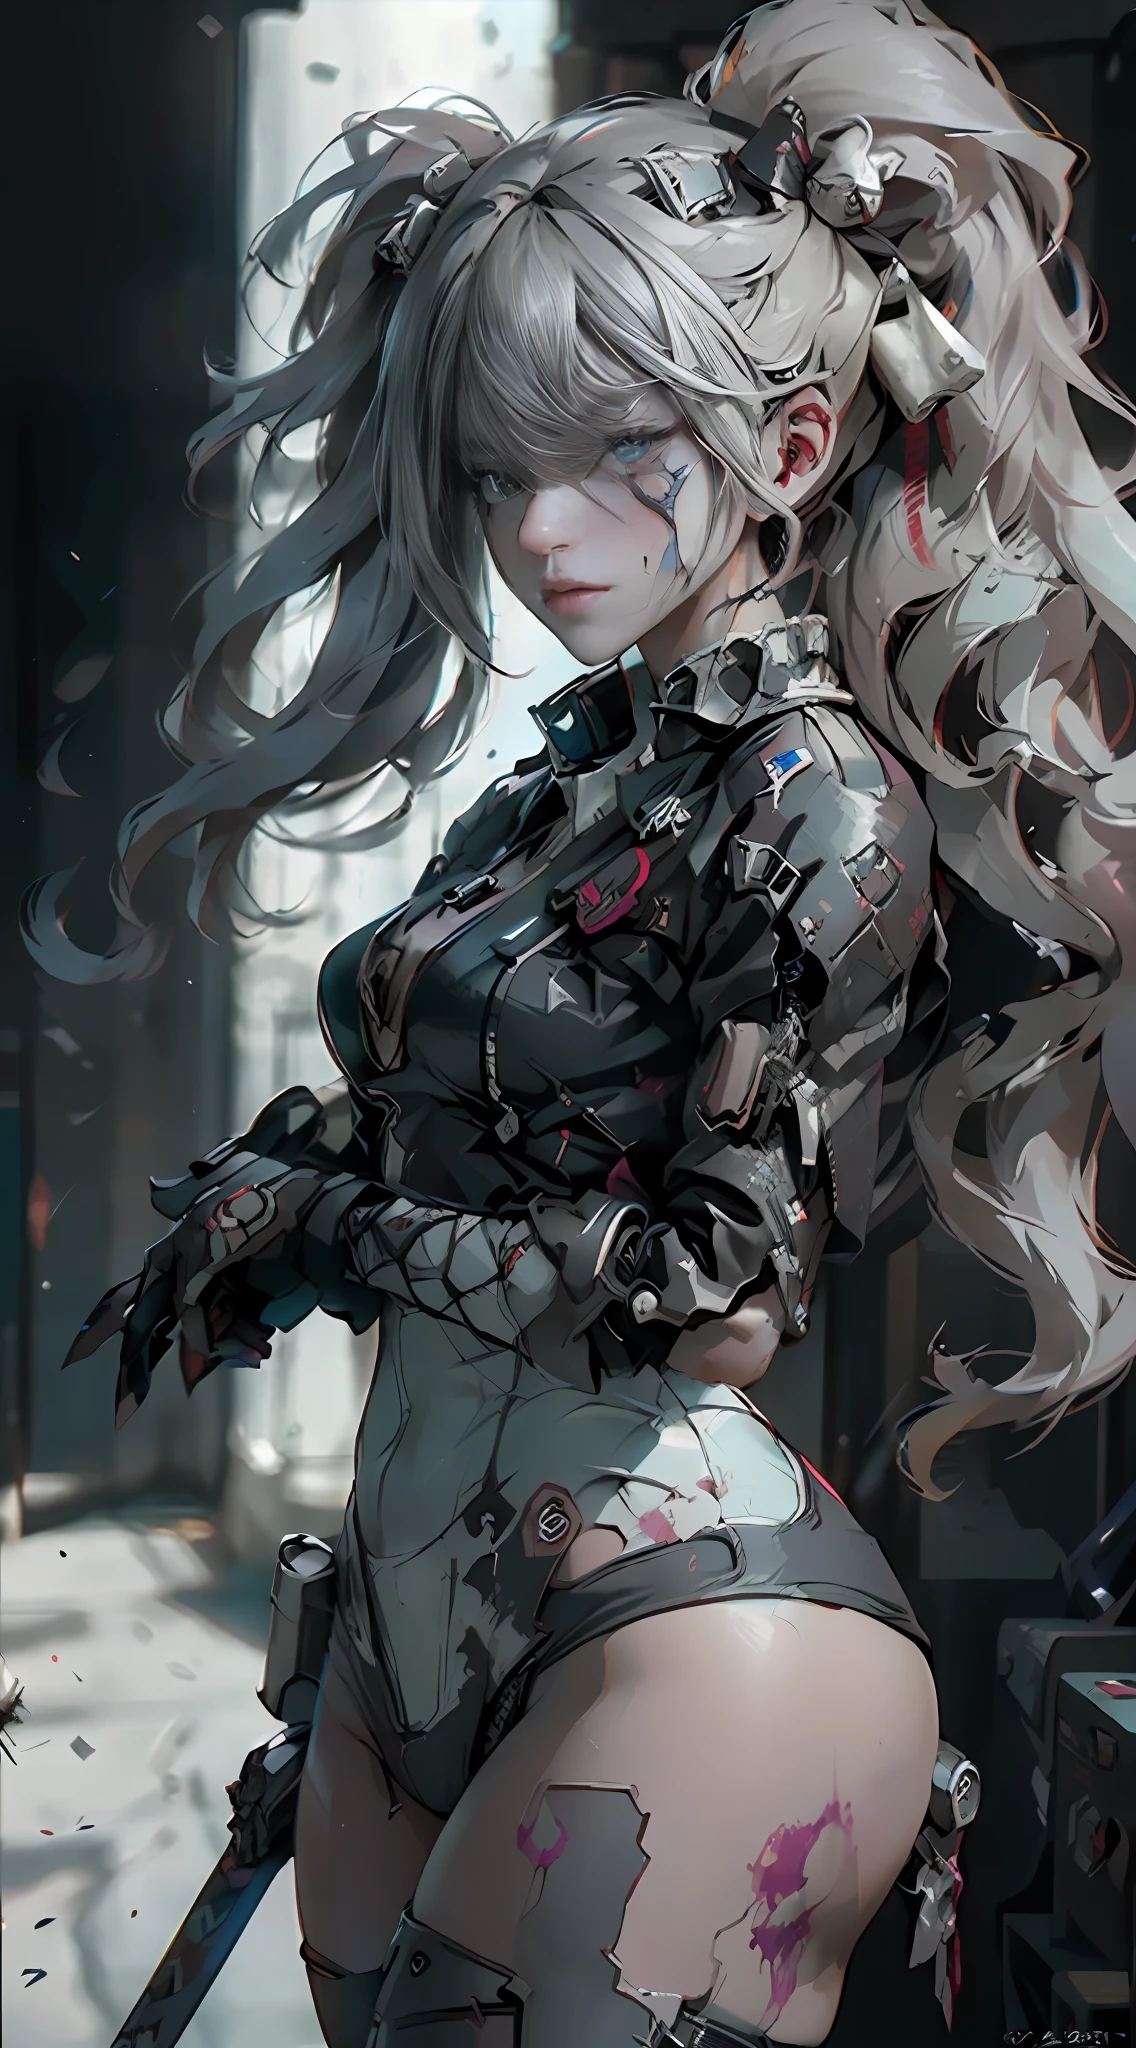 ((Best Quality)), ((Masterpiece), (Details: 1.4), 3D, A Beautiful Cyberpunk Female Figure, HDR (High Dynamic Range), Battle Damaged Girl, Blood Stains on Face, Blood Stains on Face, Broken Clothes, Broken Clothes, Broken Clothes, Messy Hair, Injured Arms, Holding a Sword, Fierce Expression, Green Eyes, Ray Tracing, NVIDIA RTX, Super-Resolution, Unreal 5, Subsurface Scattering, PBR Textures, Post-processing, anisotropic filtering, depth of field, maximum sharpness and sharpness, multi-layer textures, albedo and highlight mapping, surface shading, accurate simulation of light-material interactions, perfect proportions, Octane Render, two-color light, large aperture, low ISO, white balance, rule of thirds, 8K RAW,